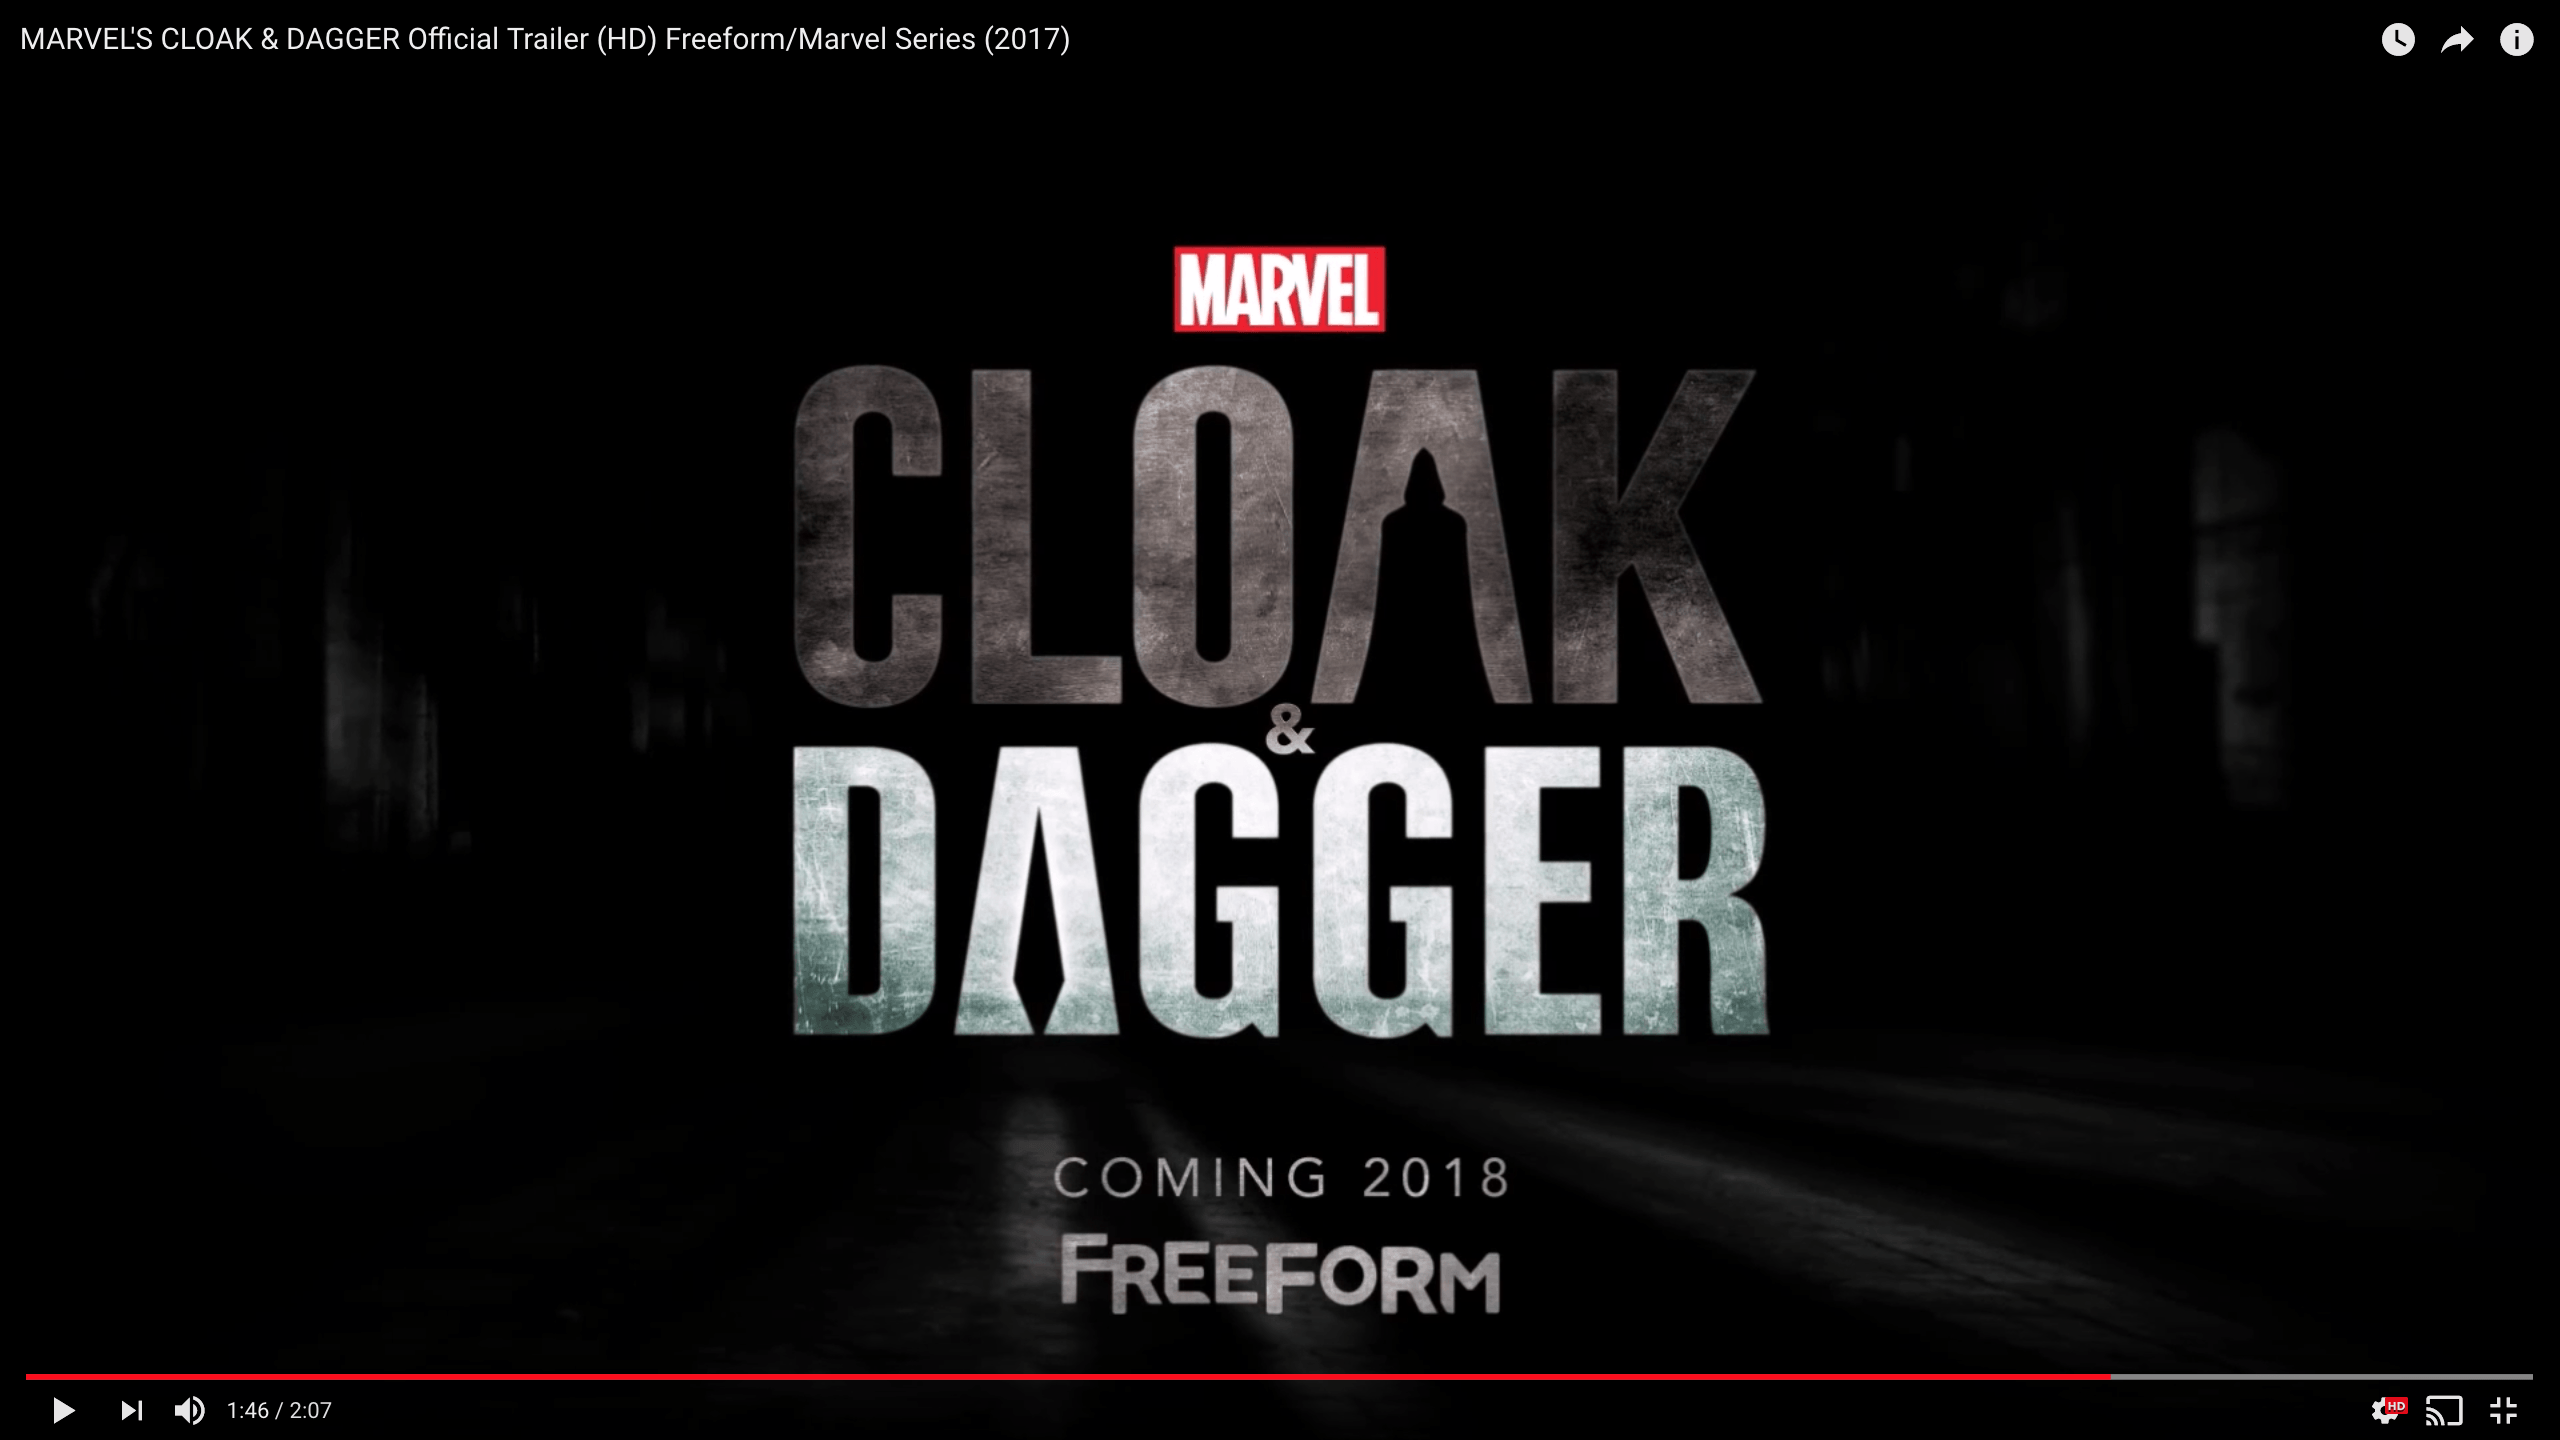 Marvel's “Cloak and Dagger” coming June 7th